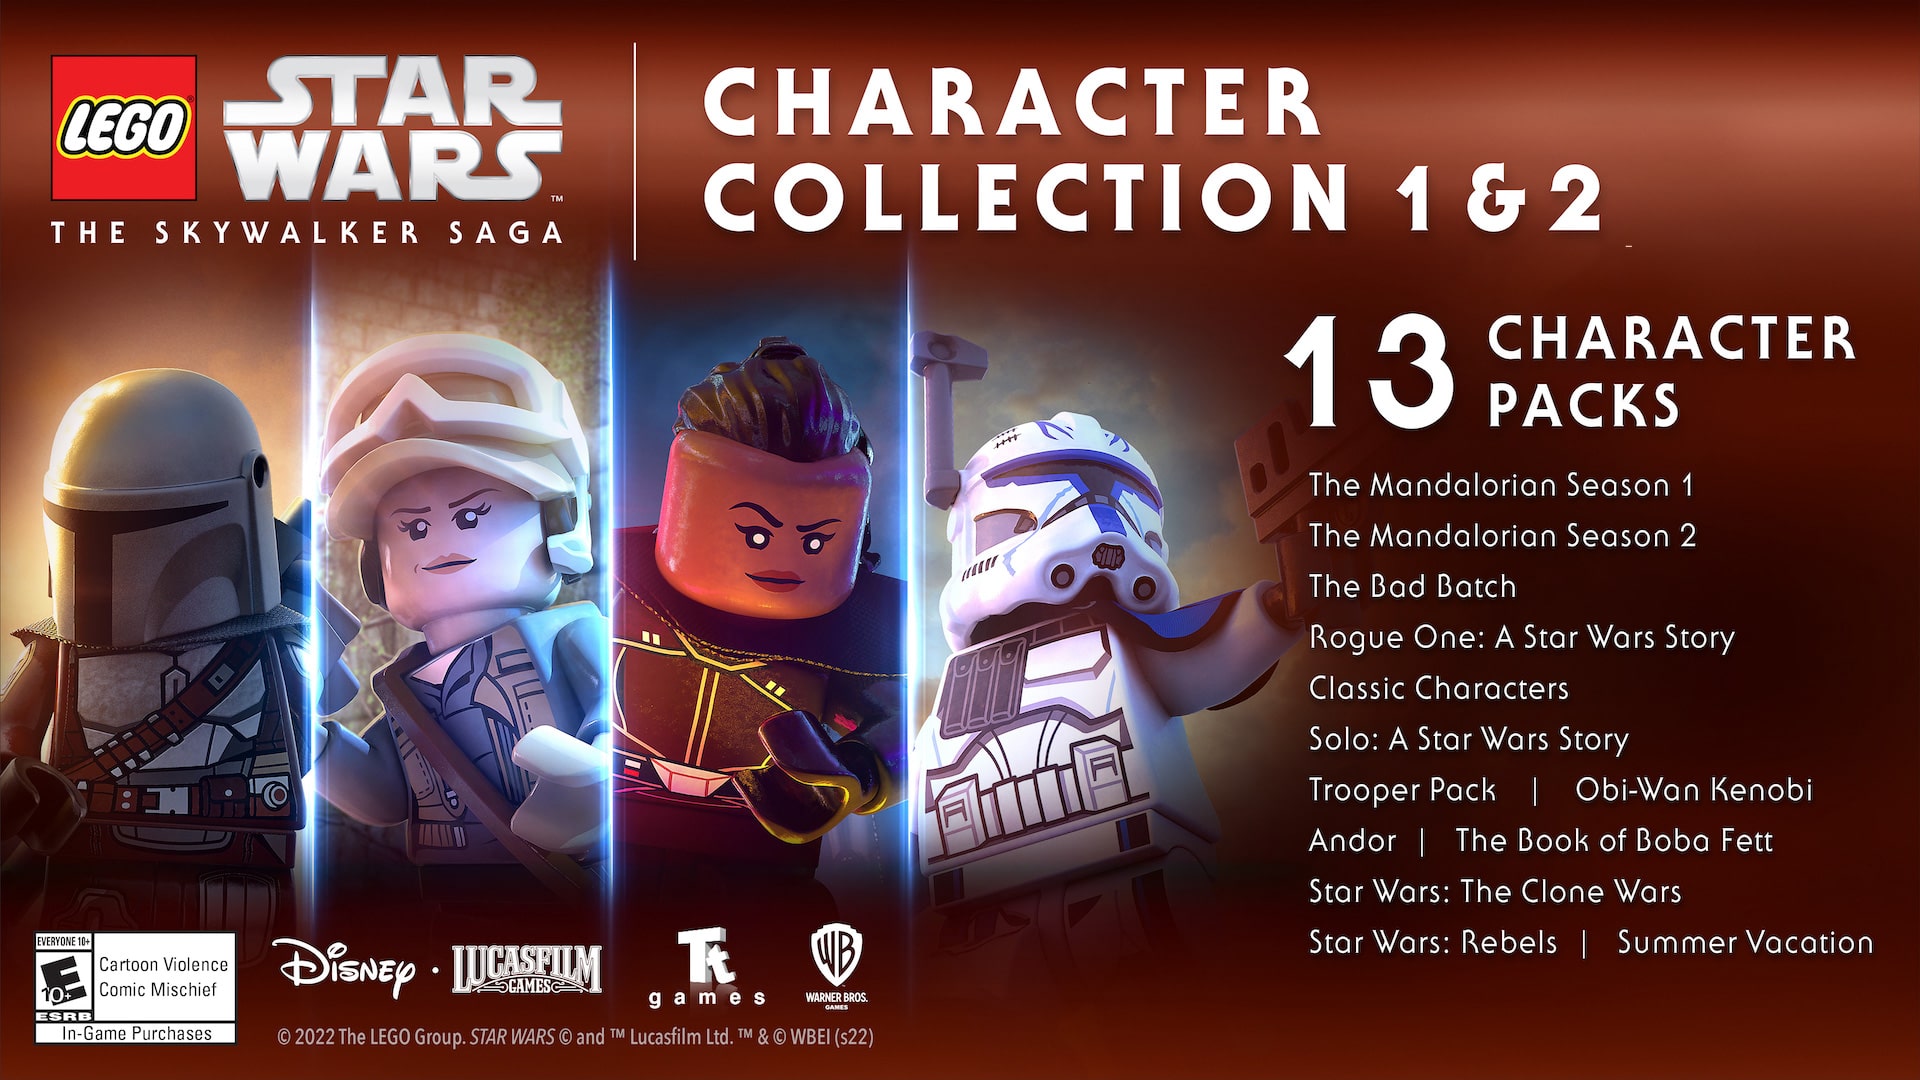 LEGO Star Wars: The Skywalker Saga Character Collection 1 And 2 Image